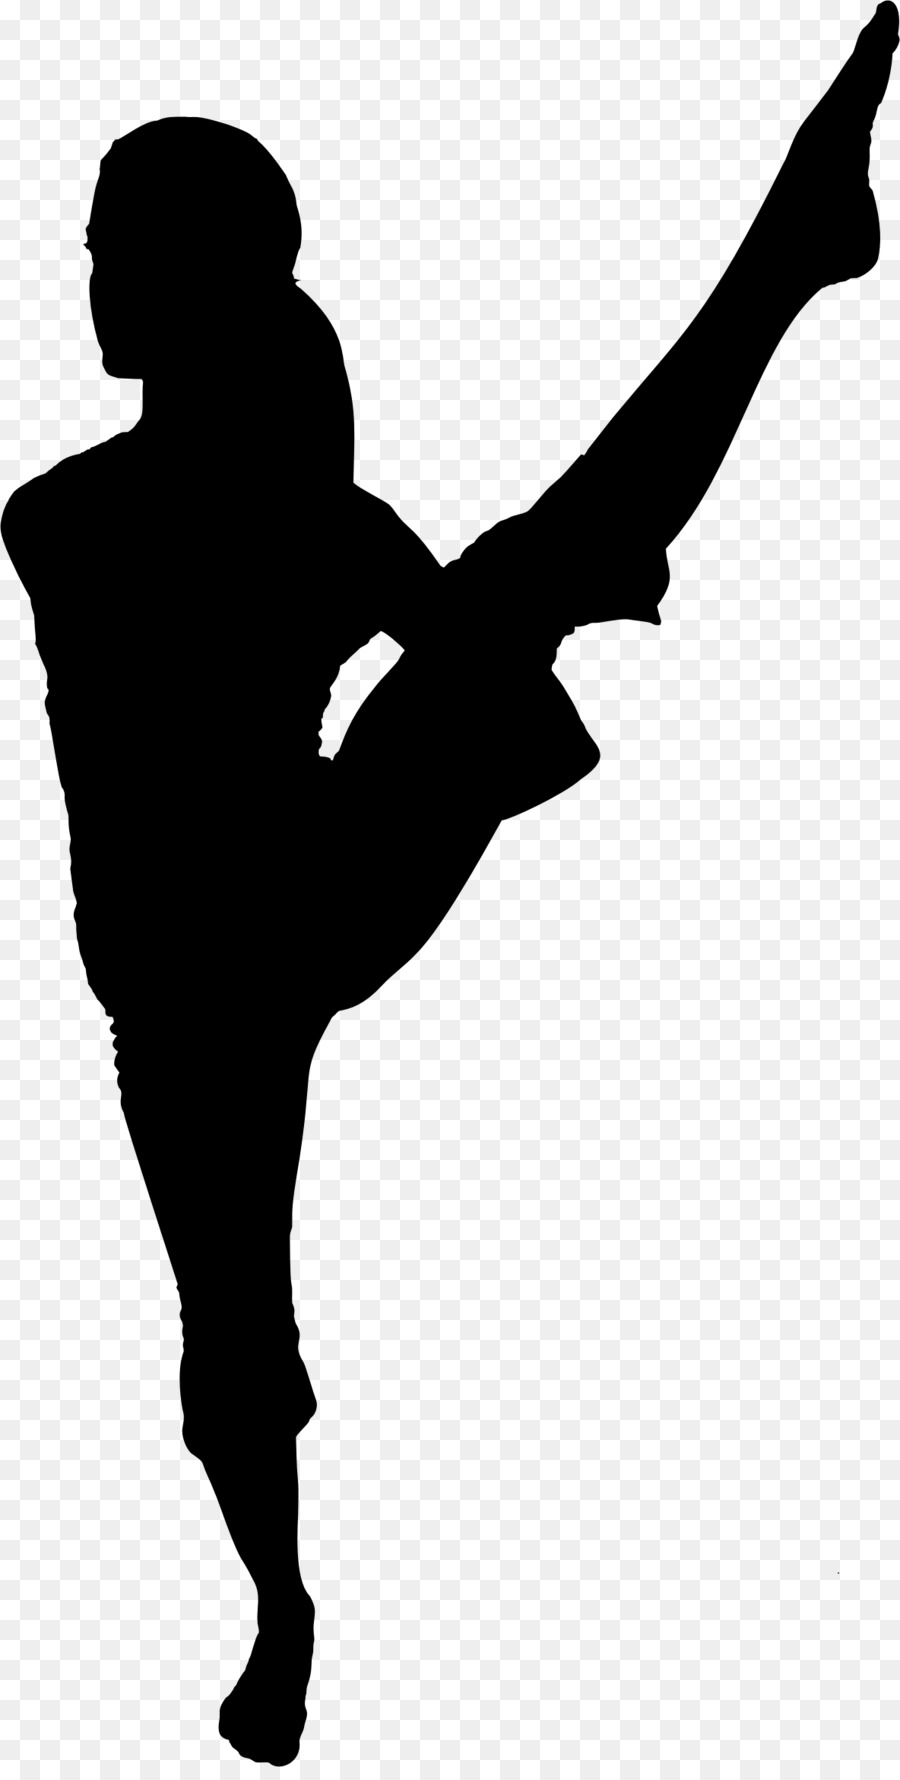 Silhouette Clip art - Yoga png download - 1184*2324 - Free Transparent Silhouette png Download.